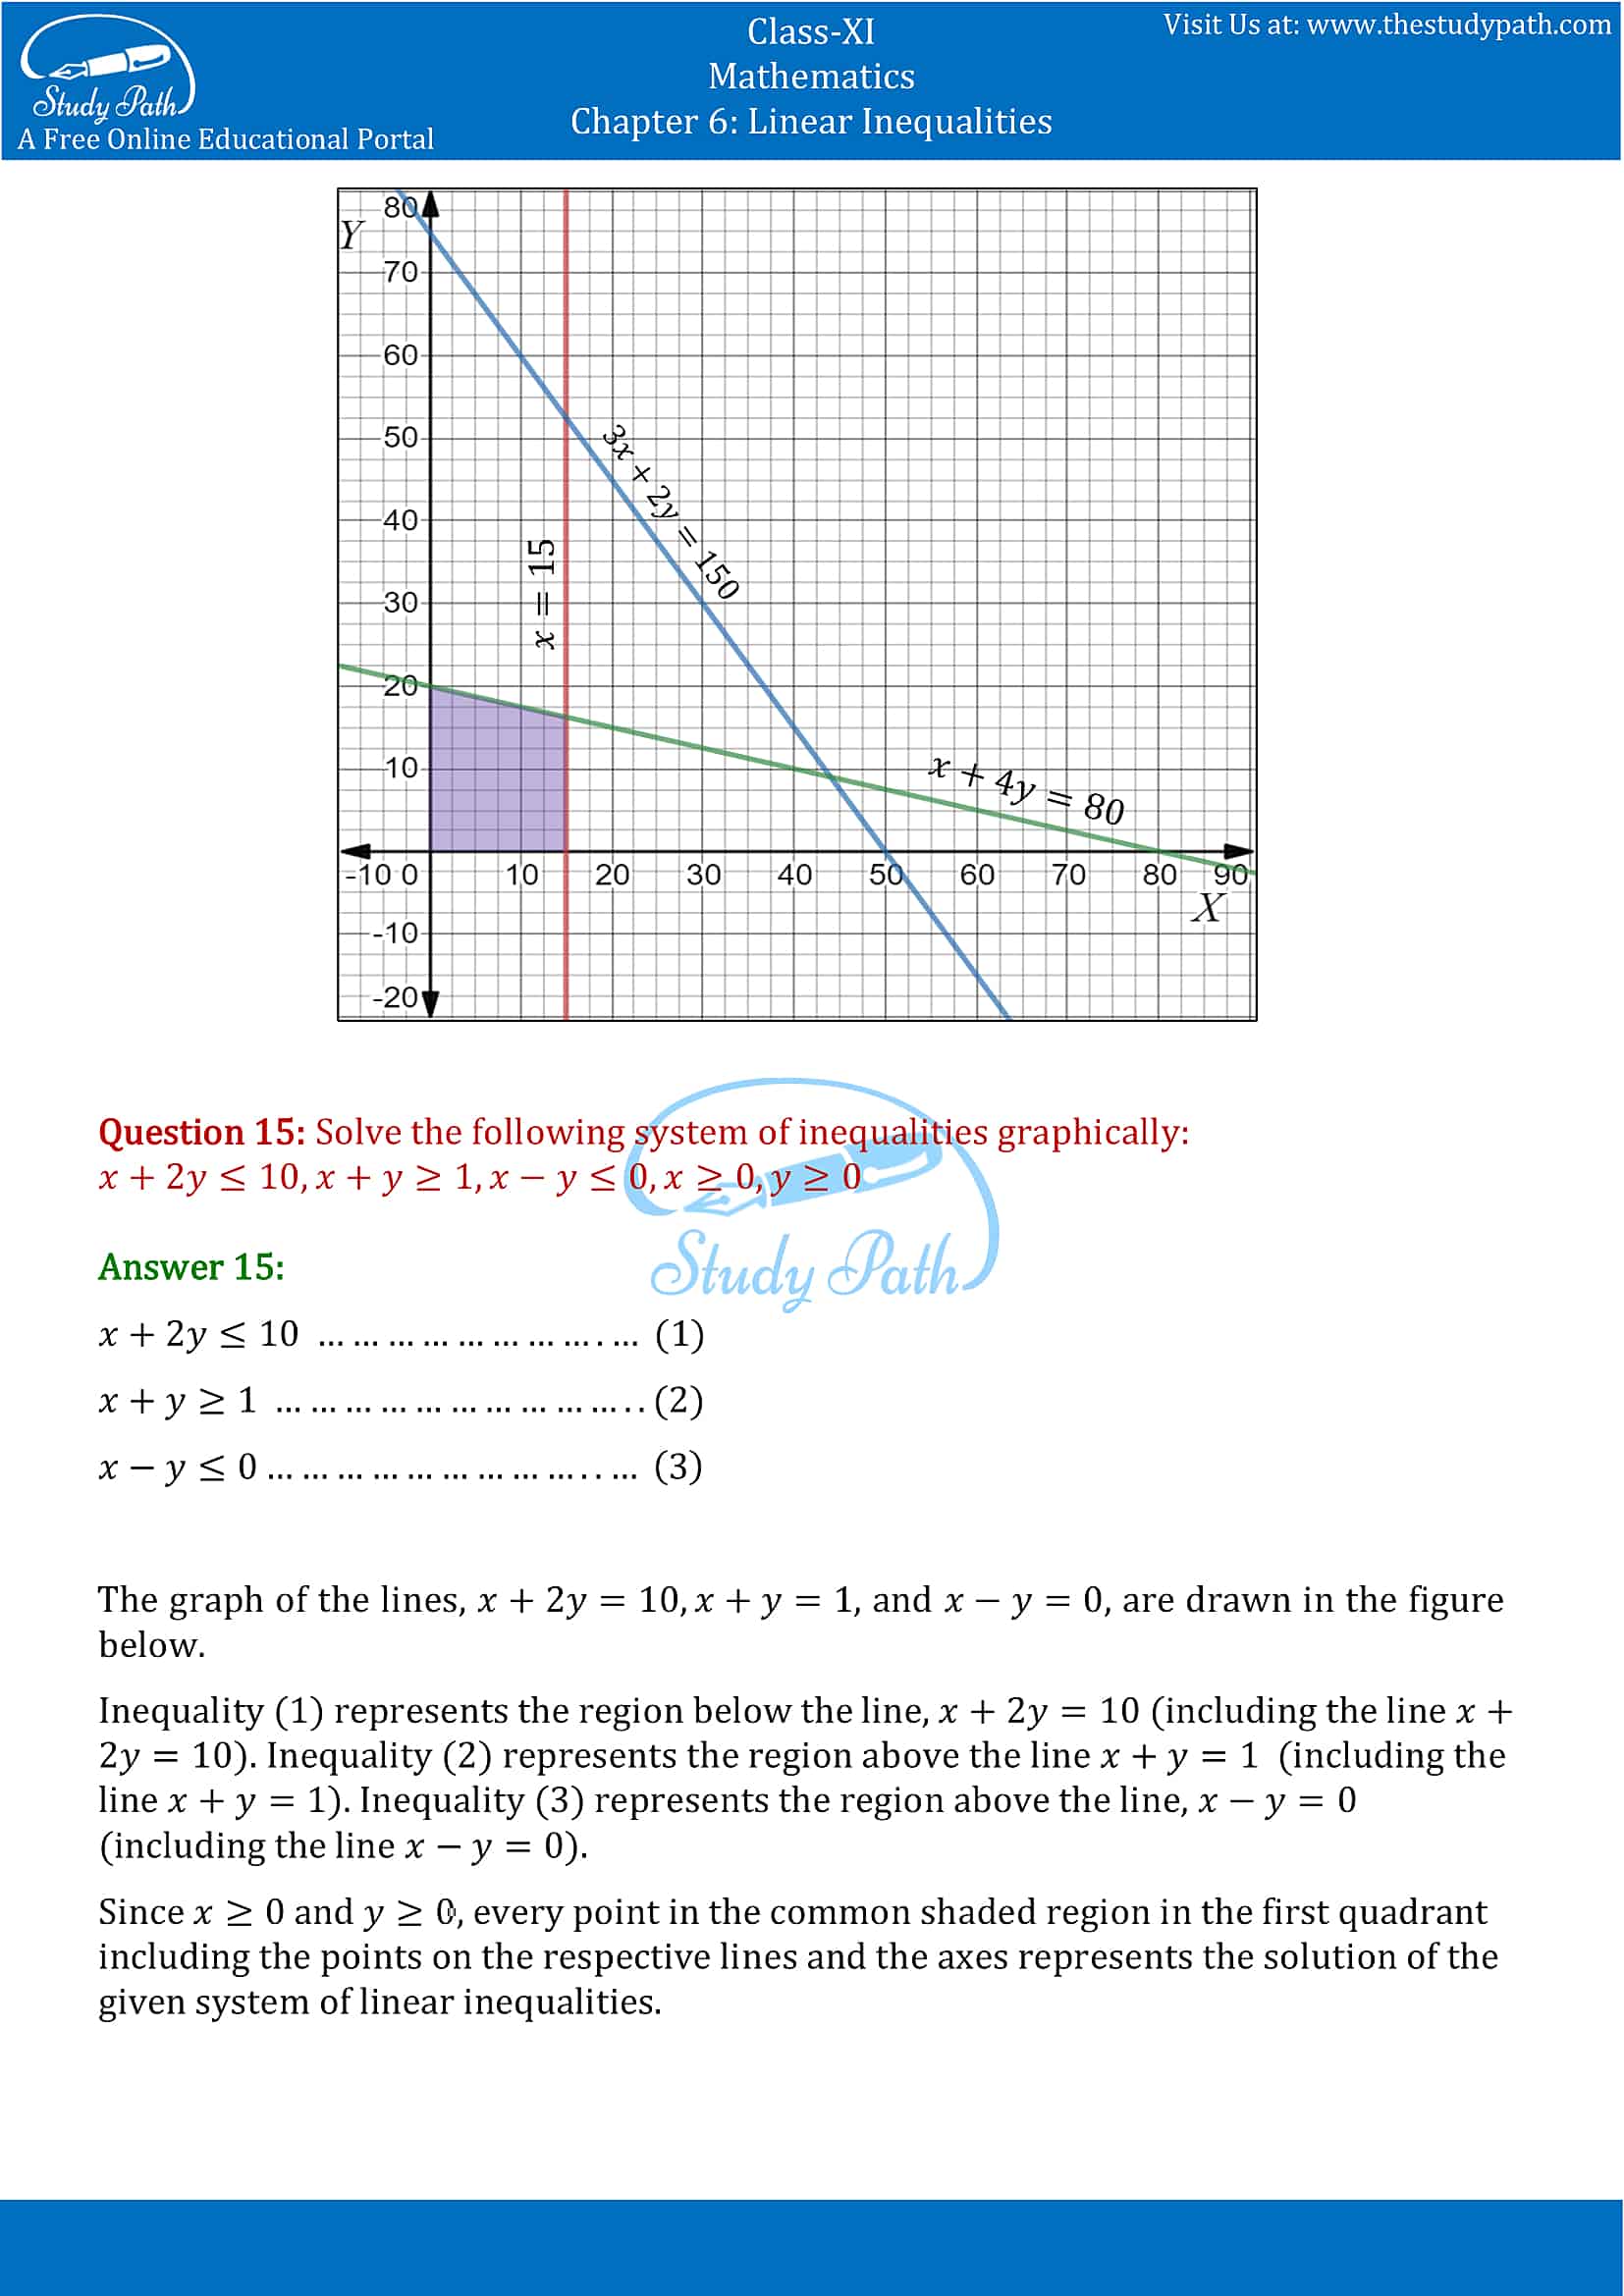 NCERT Solutions for Class 11 Maths chapter 6 Linear Inequalities Exercise 6.3 Part-11